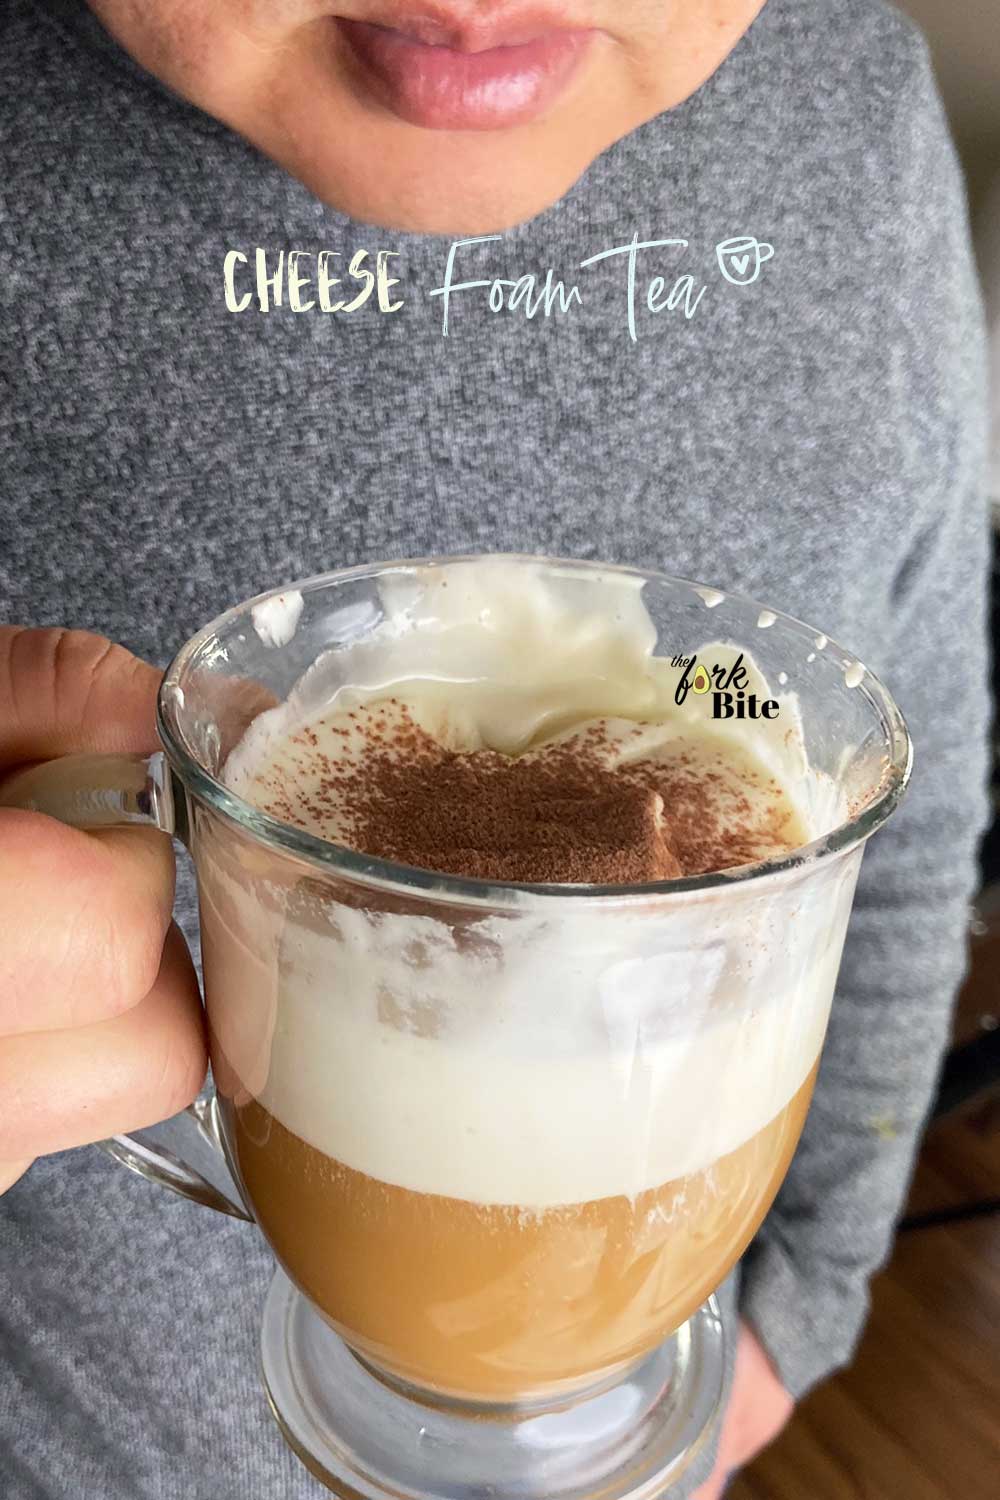 This popular Cheese Tea Recipe is topped with a fluffy cream cheese foam that creates a smooth mouthfeel and makes coffee or fruit tea special.